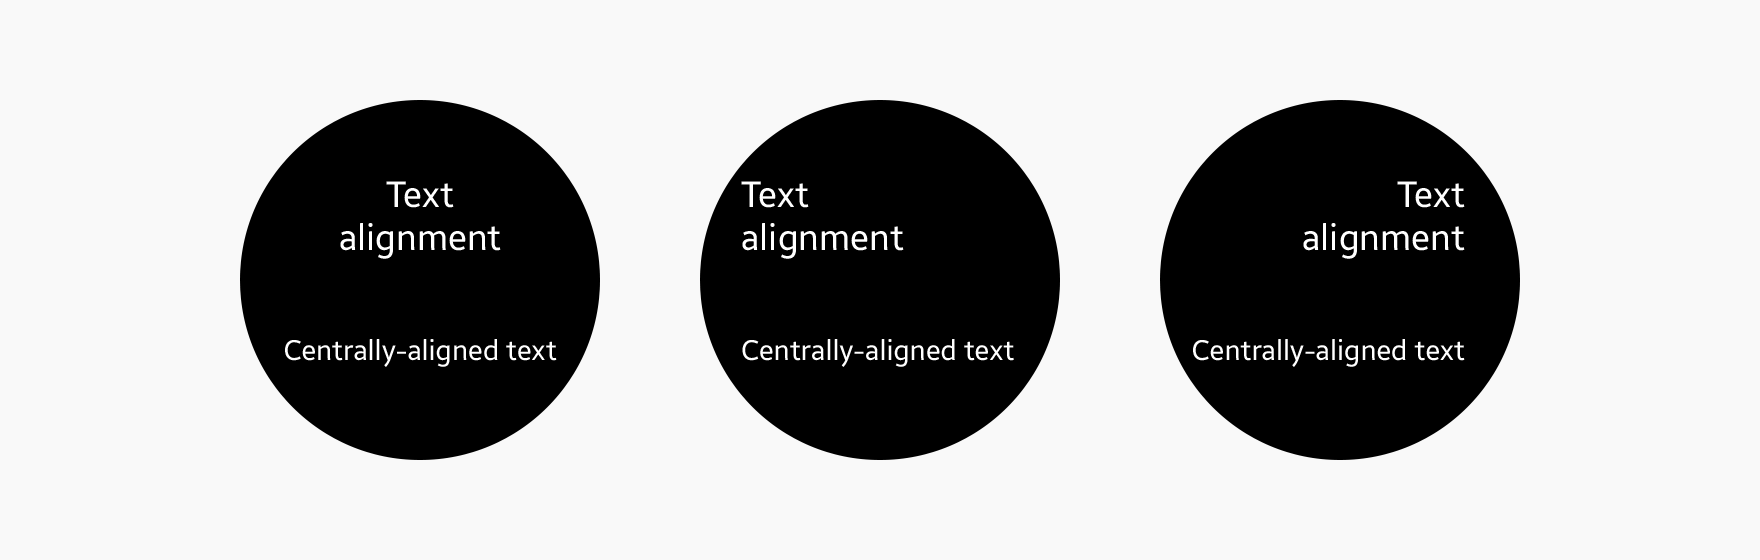 We recommend aligning text in the center when the text is short.